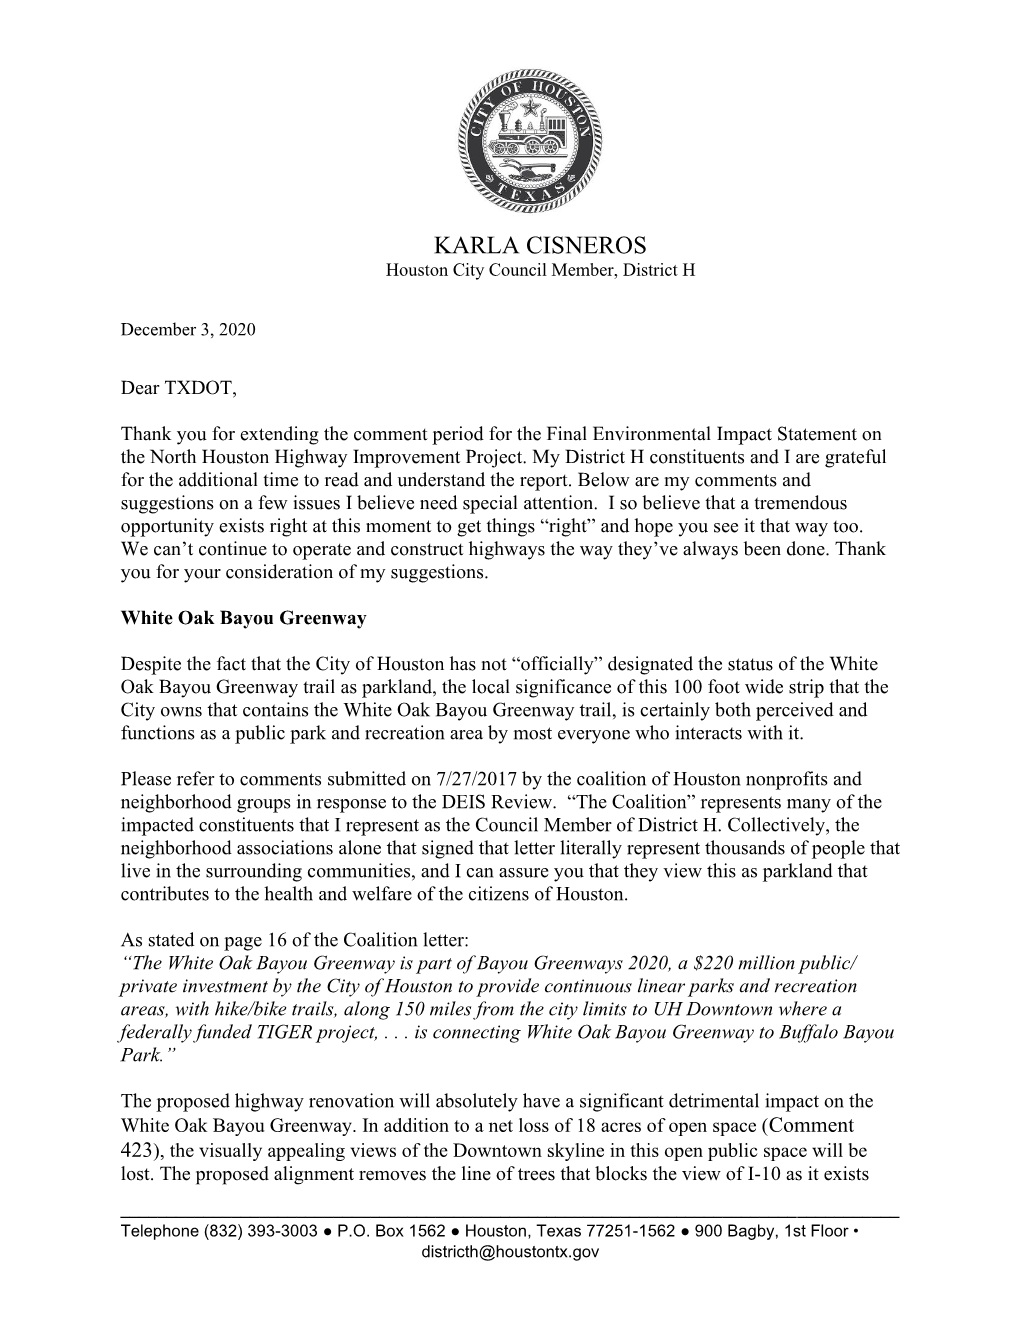 Council Member Cisneros Comments on FEIS to Txdot